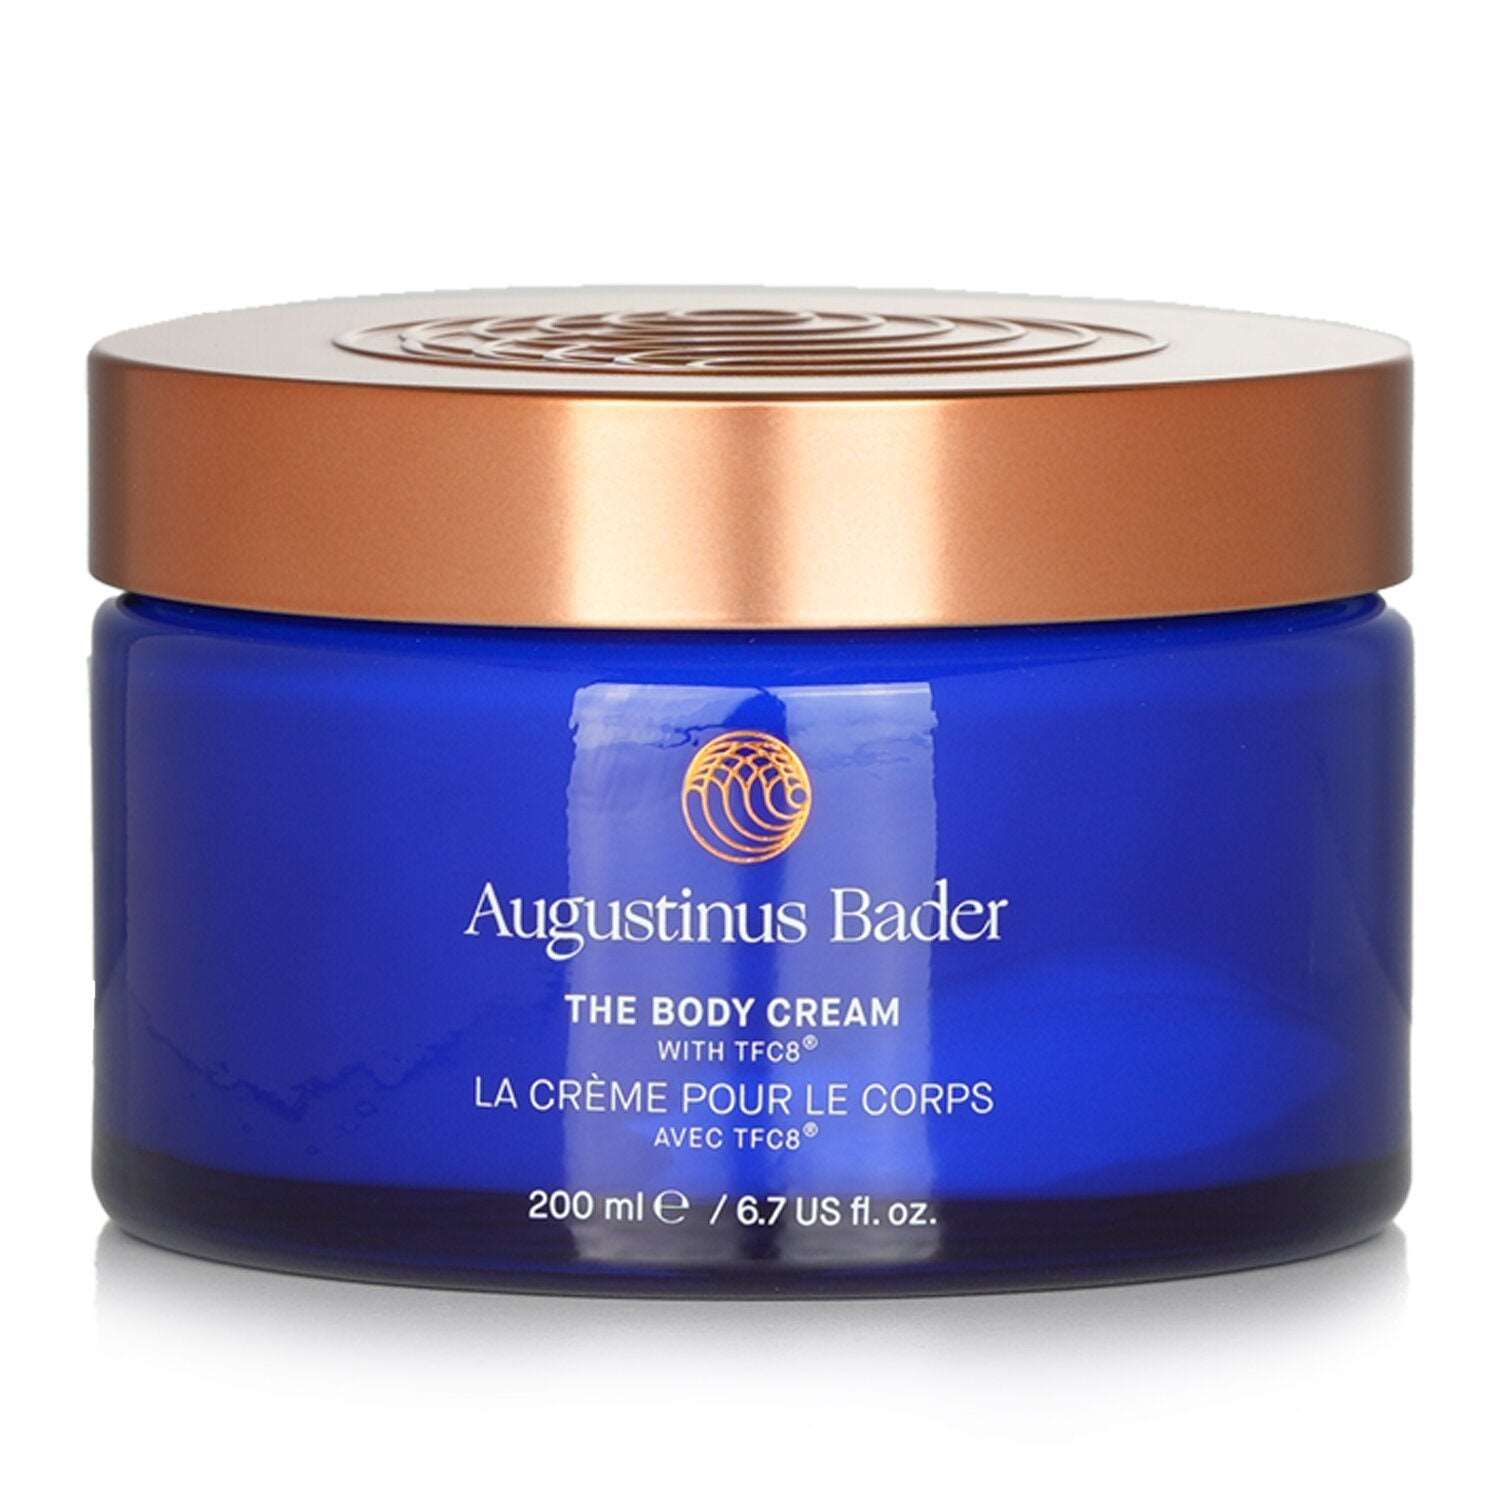 AUGUSTINUS BADER - The Body Cream with TFC8 - 200ml/6.7oz 3P's Inclusive Beauty